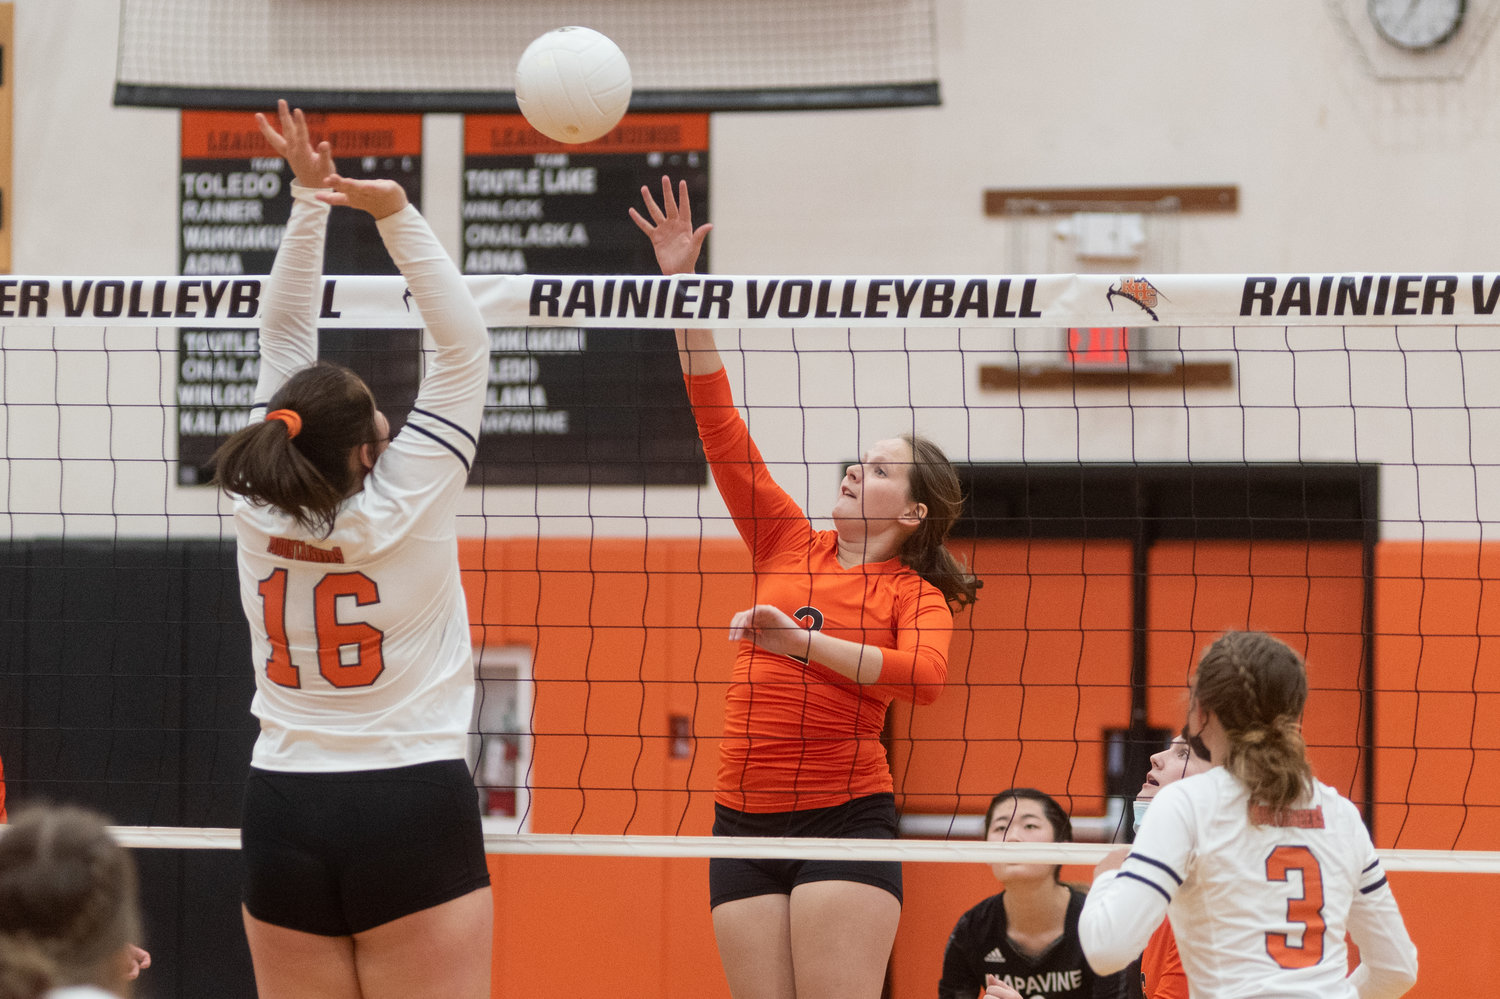 Napavine sophomore Anna Thompson attempts a spike in the Tigers match against Rainier Monday night.